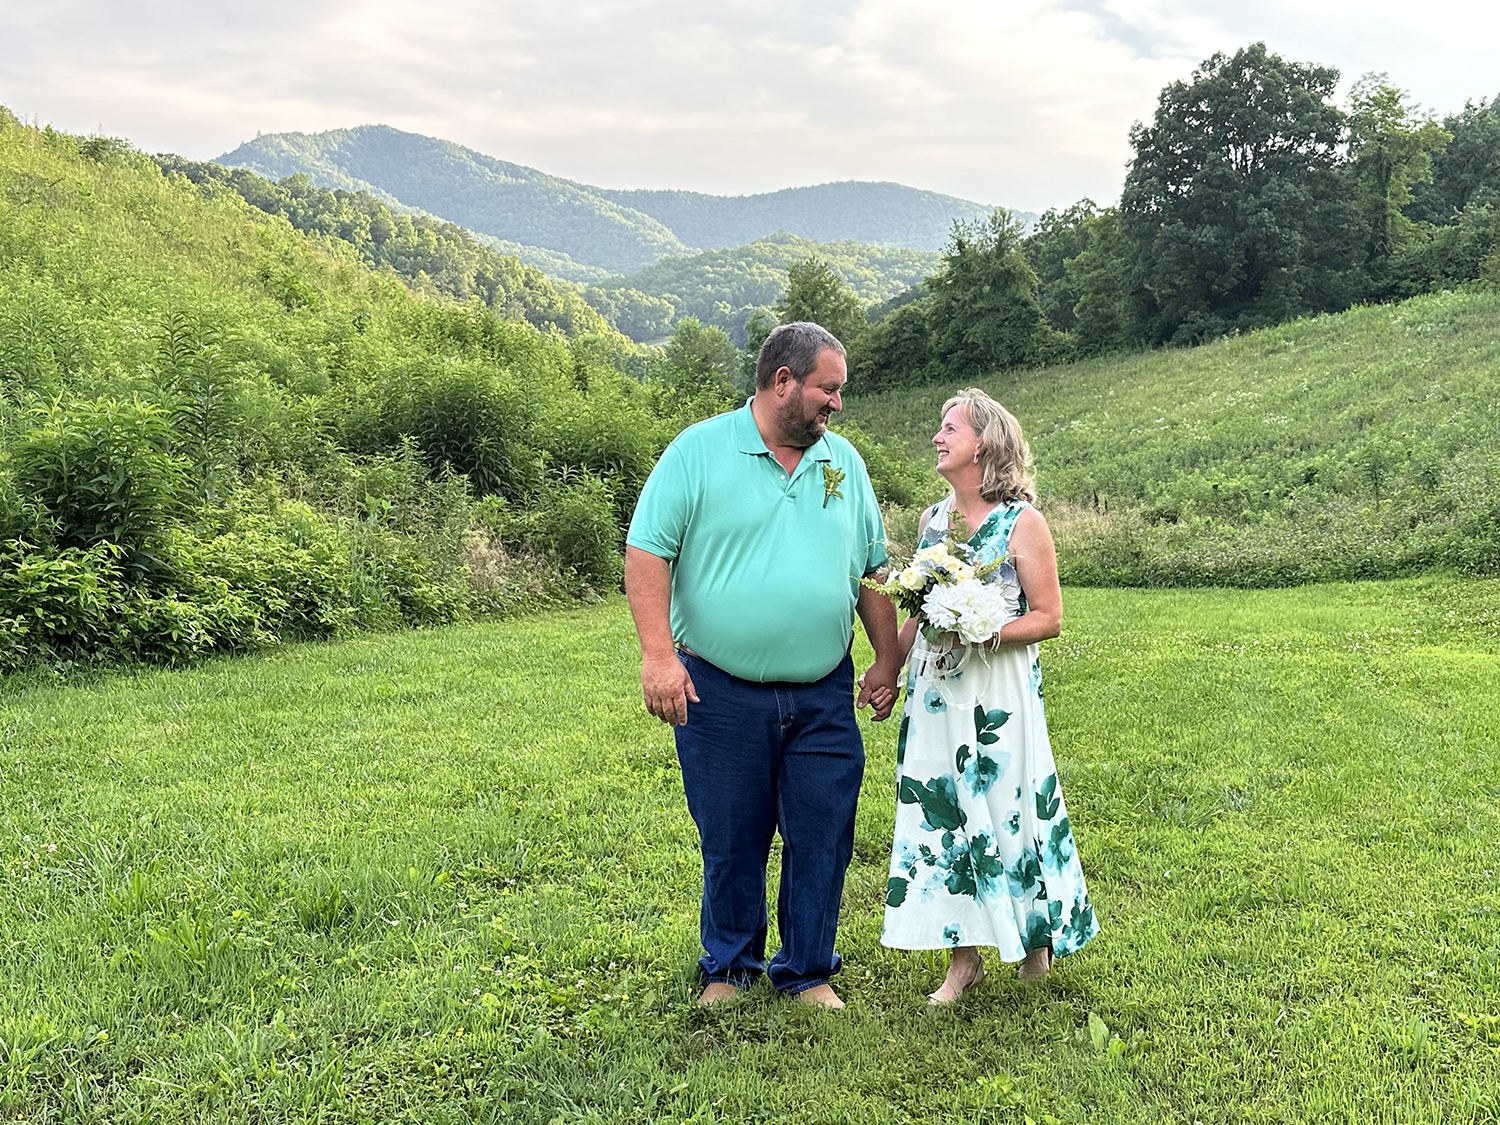 Informal couples only wedding at a mountain view that looks like Cades Cove